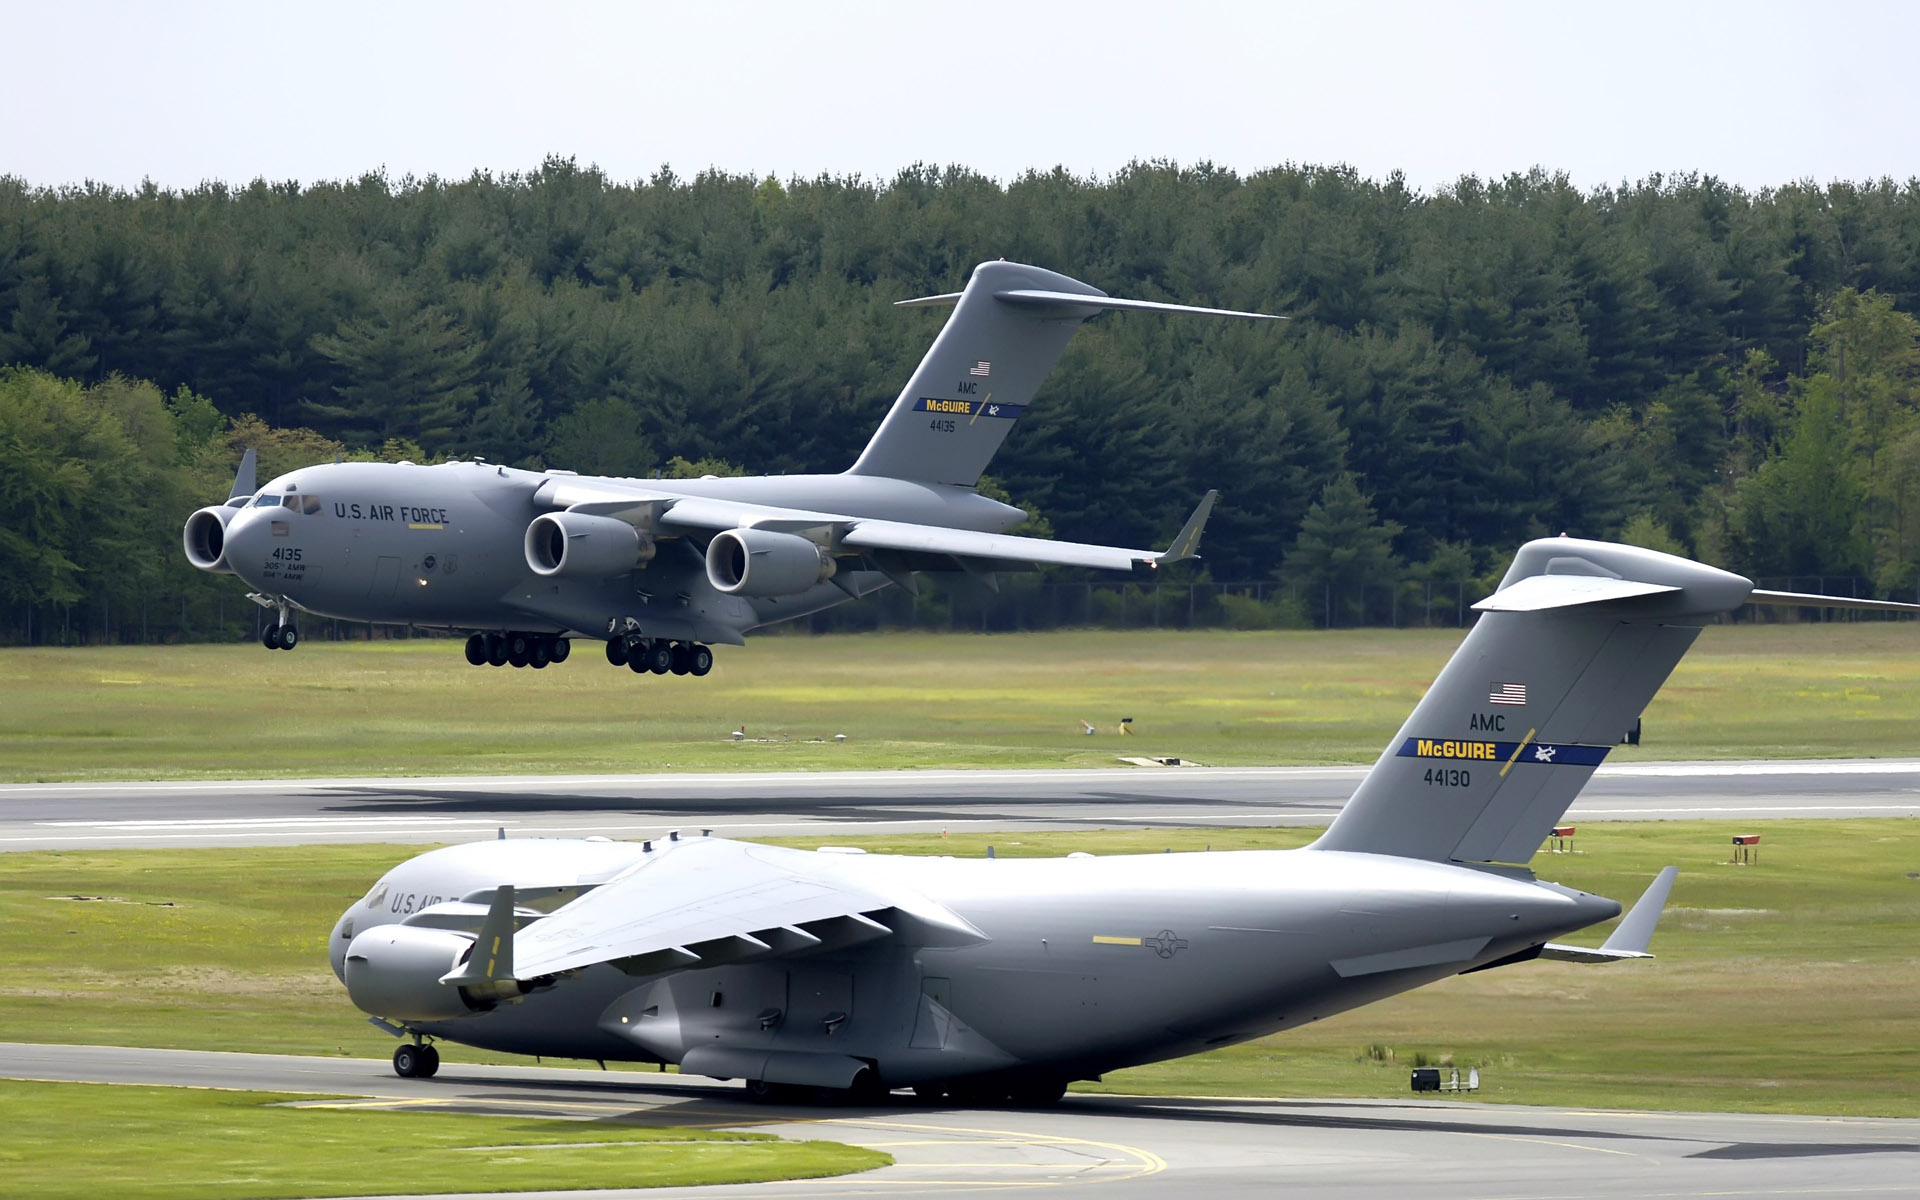 Boeing C 17 Globemaster III Military transport aircraft 4K Wallpapers  HD  Wallpapers  ID 21601